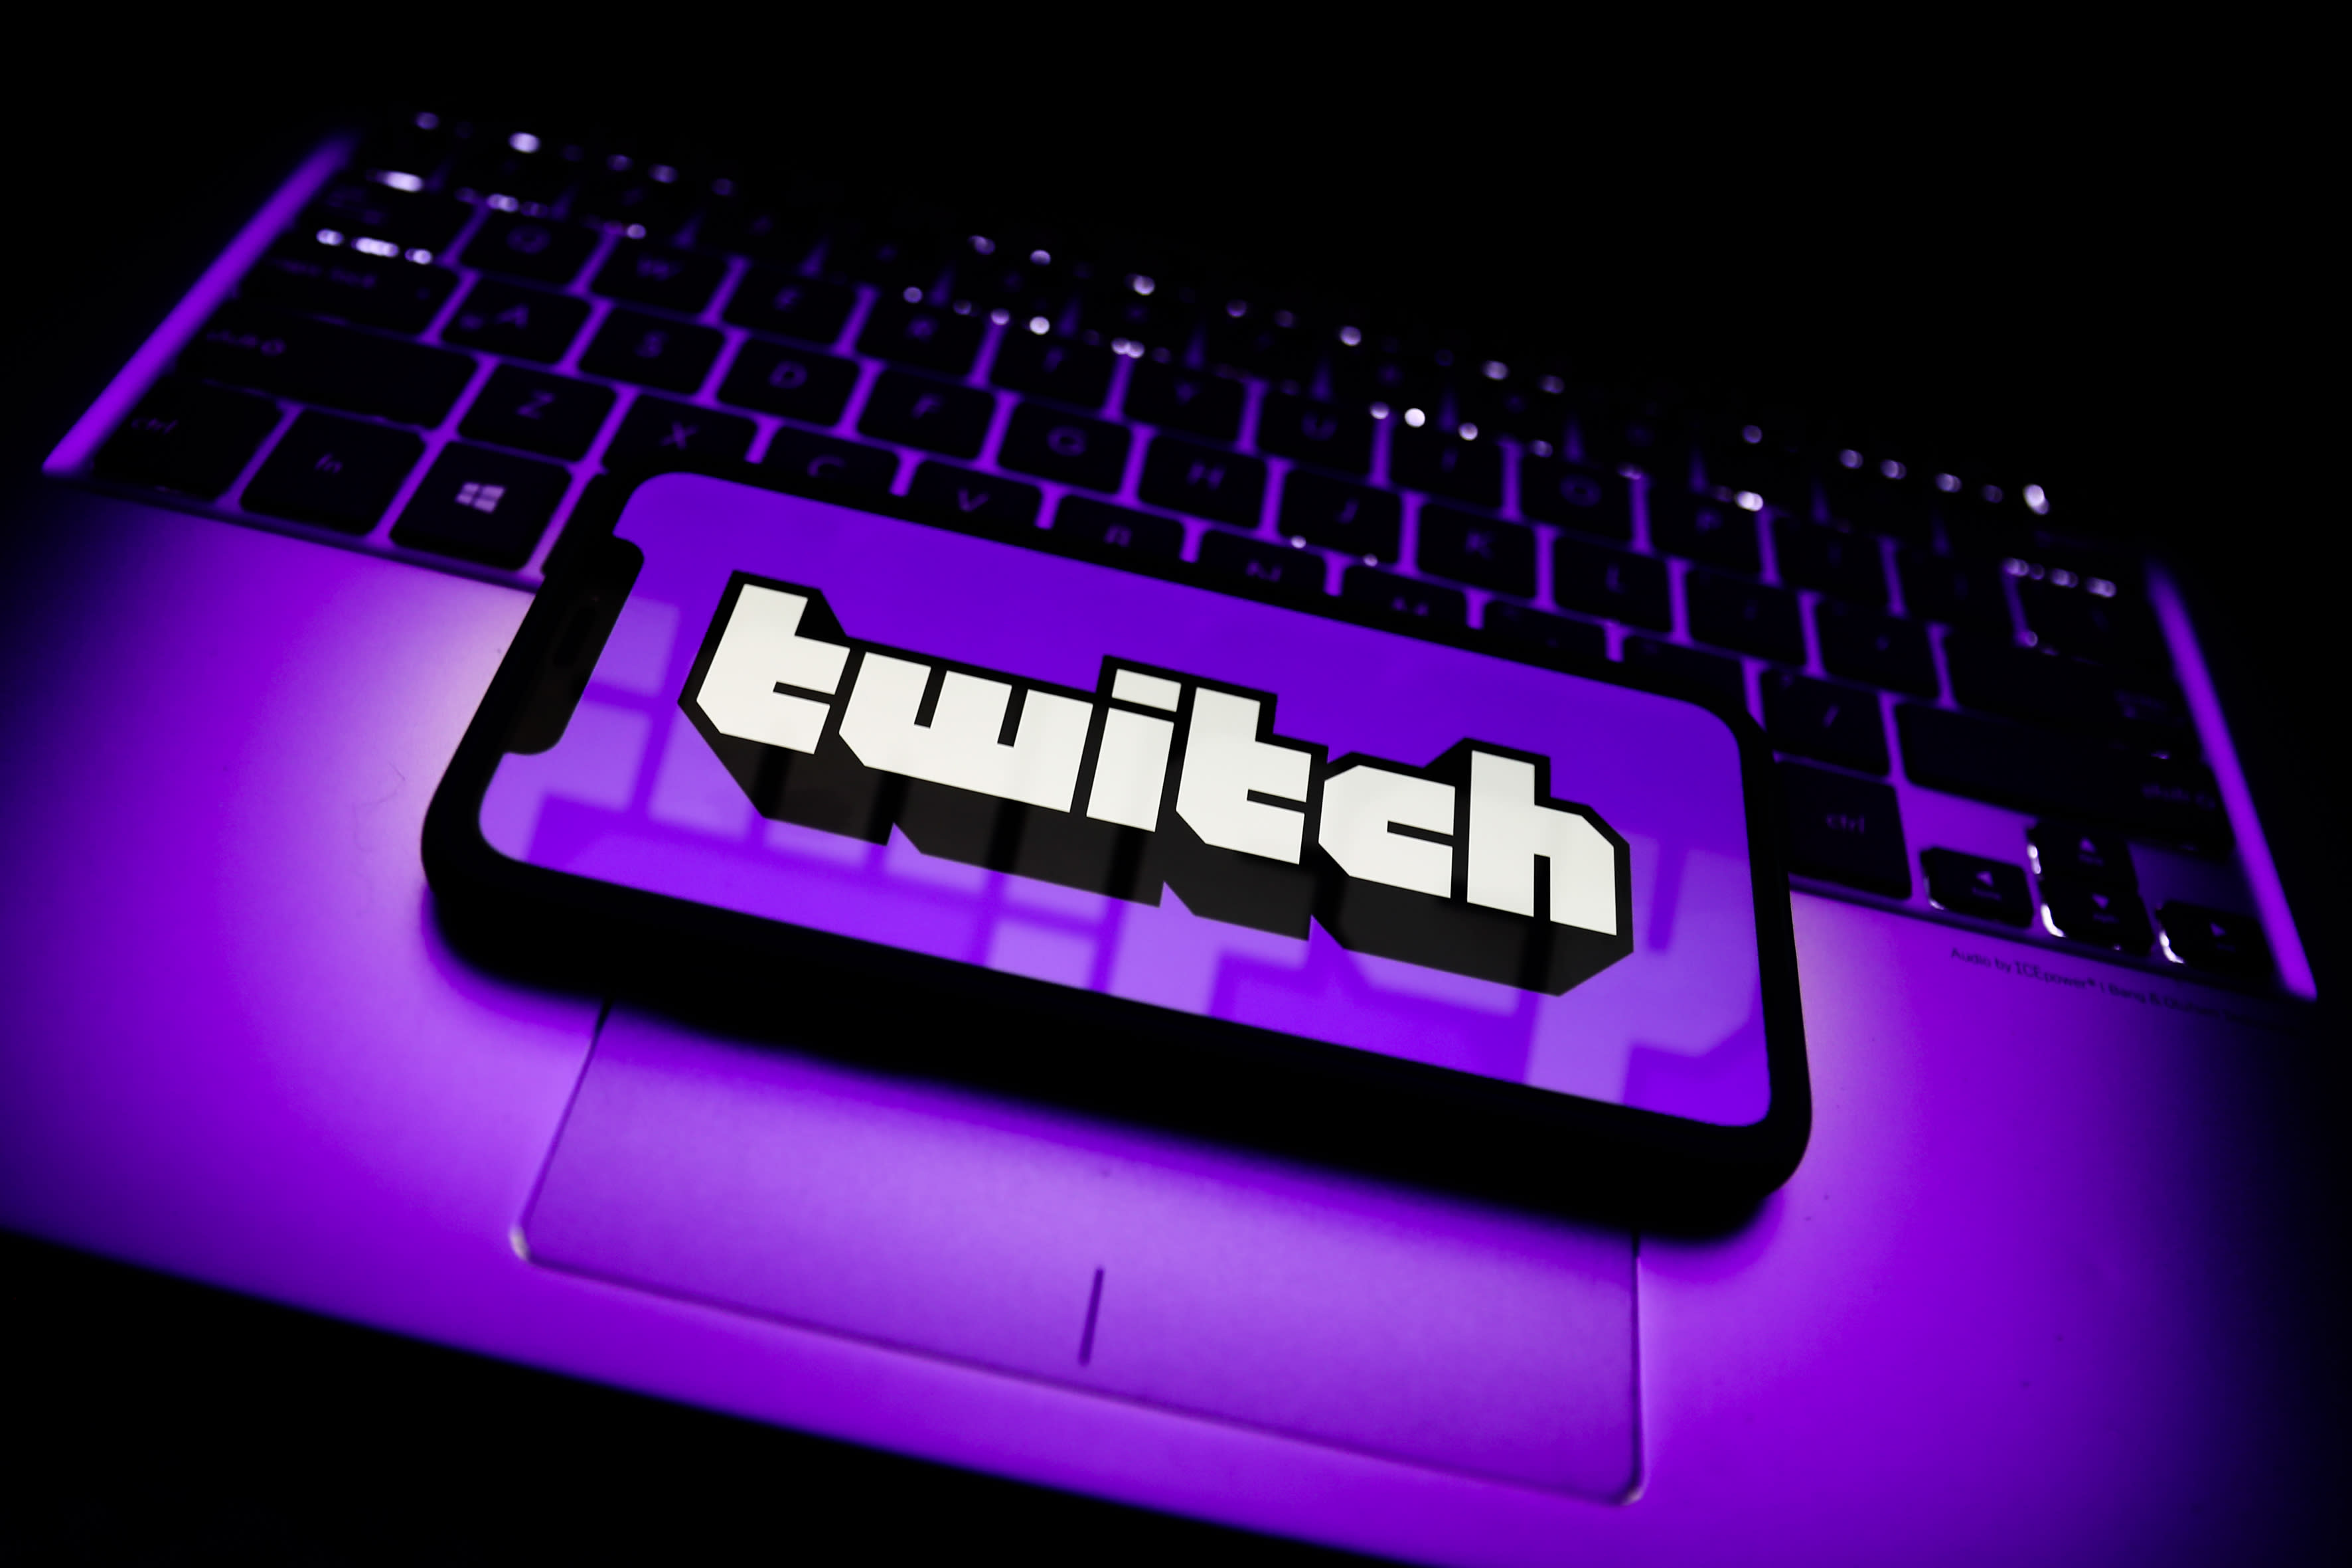 Twitch Finally Addresses Porn Deepfake Scandal Over A Month Later